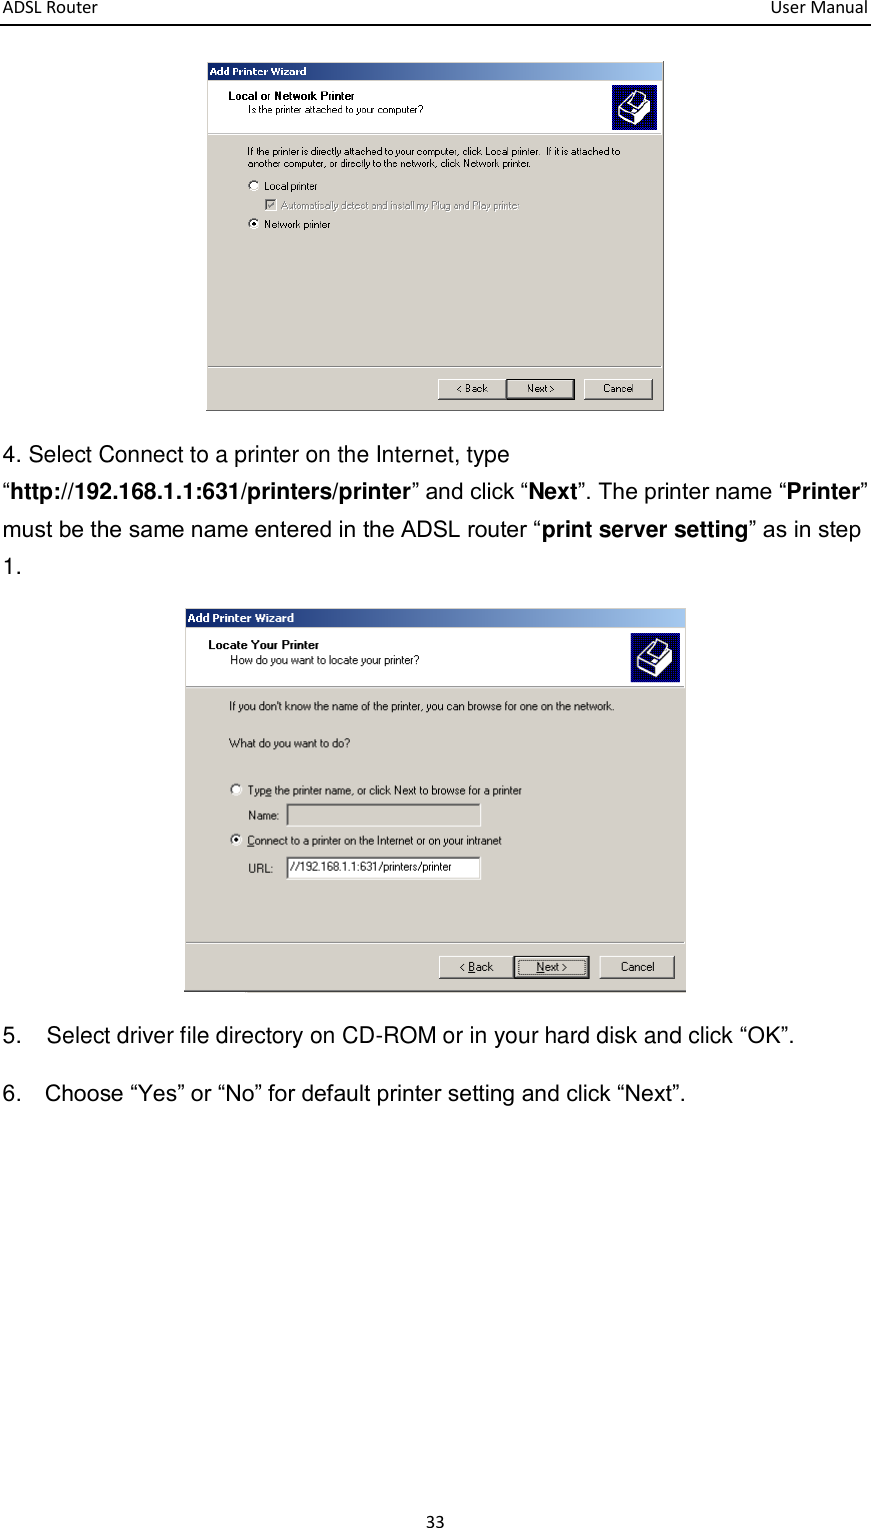 ADSL Router       User Manual 33  4. Select Connect to a printer on the Internet, type “http://192.168.1.1:631/printers/printer” and click “Next”. The printer name “Printer” must be the same name entered in the ADSL router “print server setting” as in step 1.  5.  Select driver file directory on CD-ROM or in your hard disk and click “OK”. 6.    Choose “Yes” or “No” for default printer setting and click “Next”. 